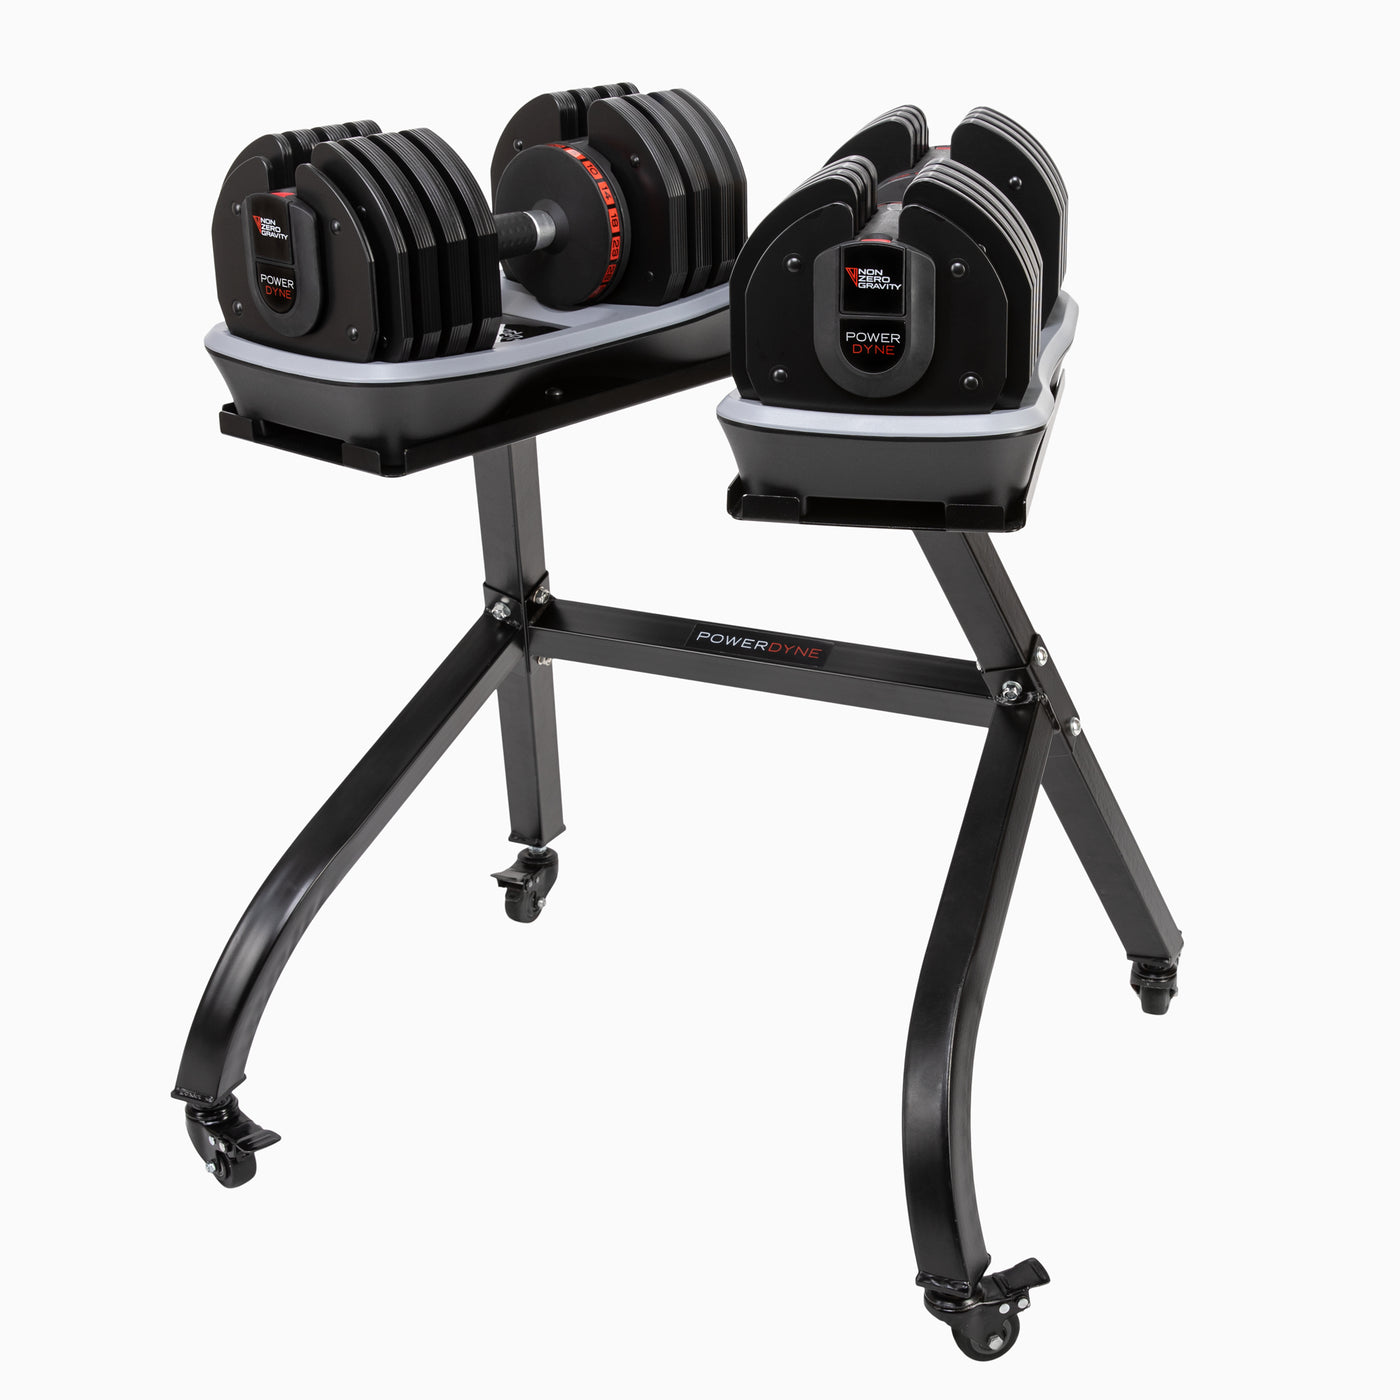 PowerDyne Adjustable Dumbbell Weight - Lift Up To 160lbs with At-Home Strength Training Equipment Combo